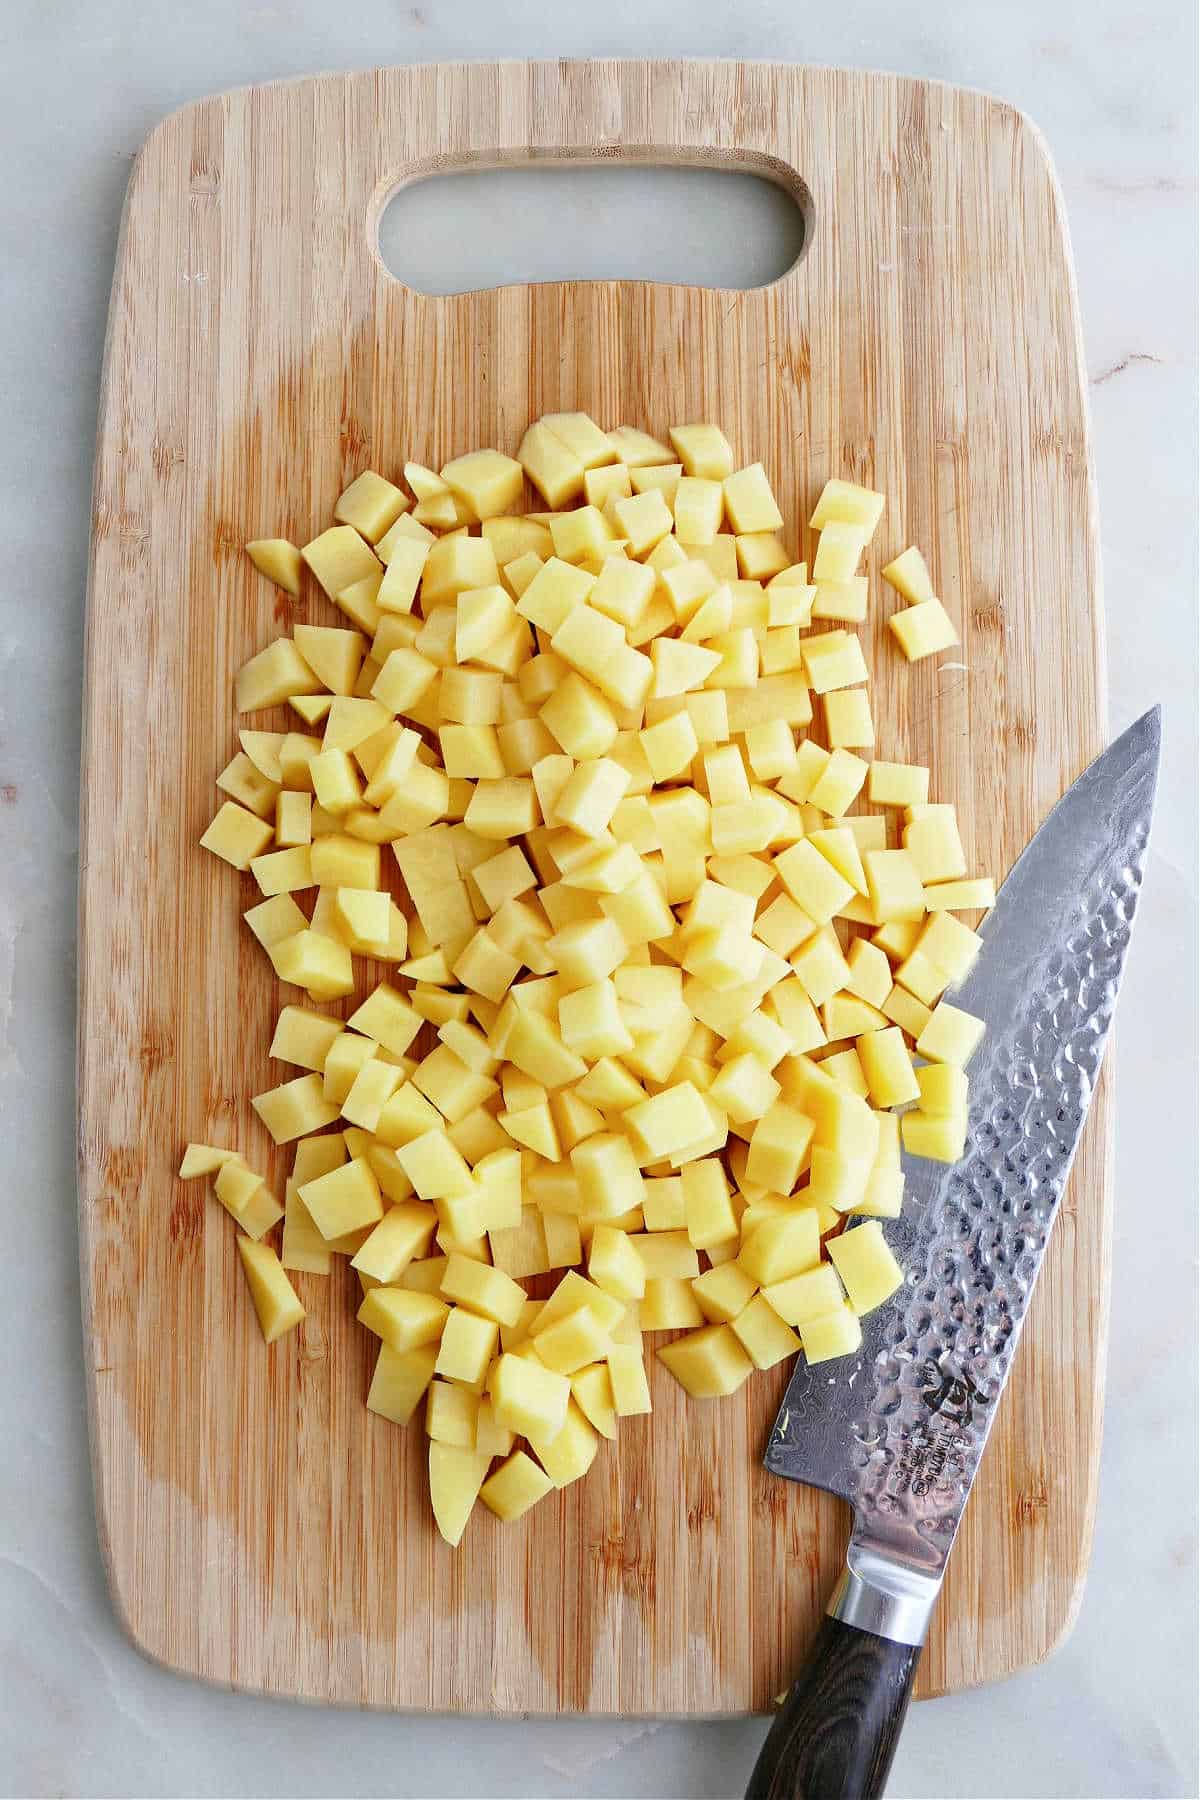 potatoes cut into small cubes on a cutting board next to a chef's knife